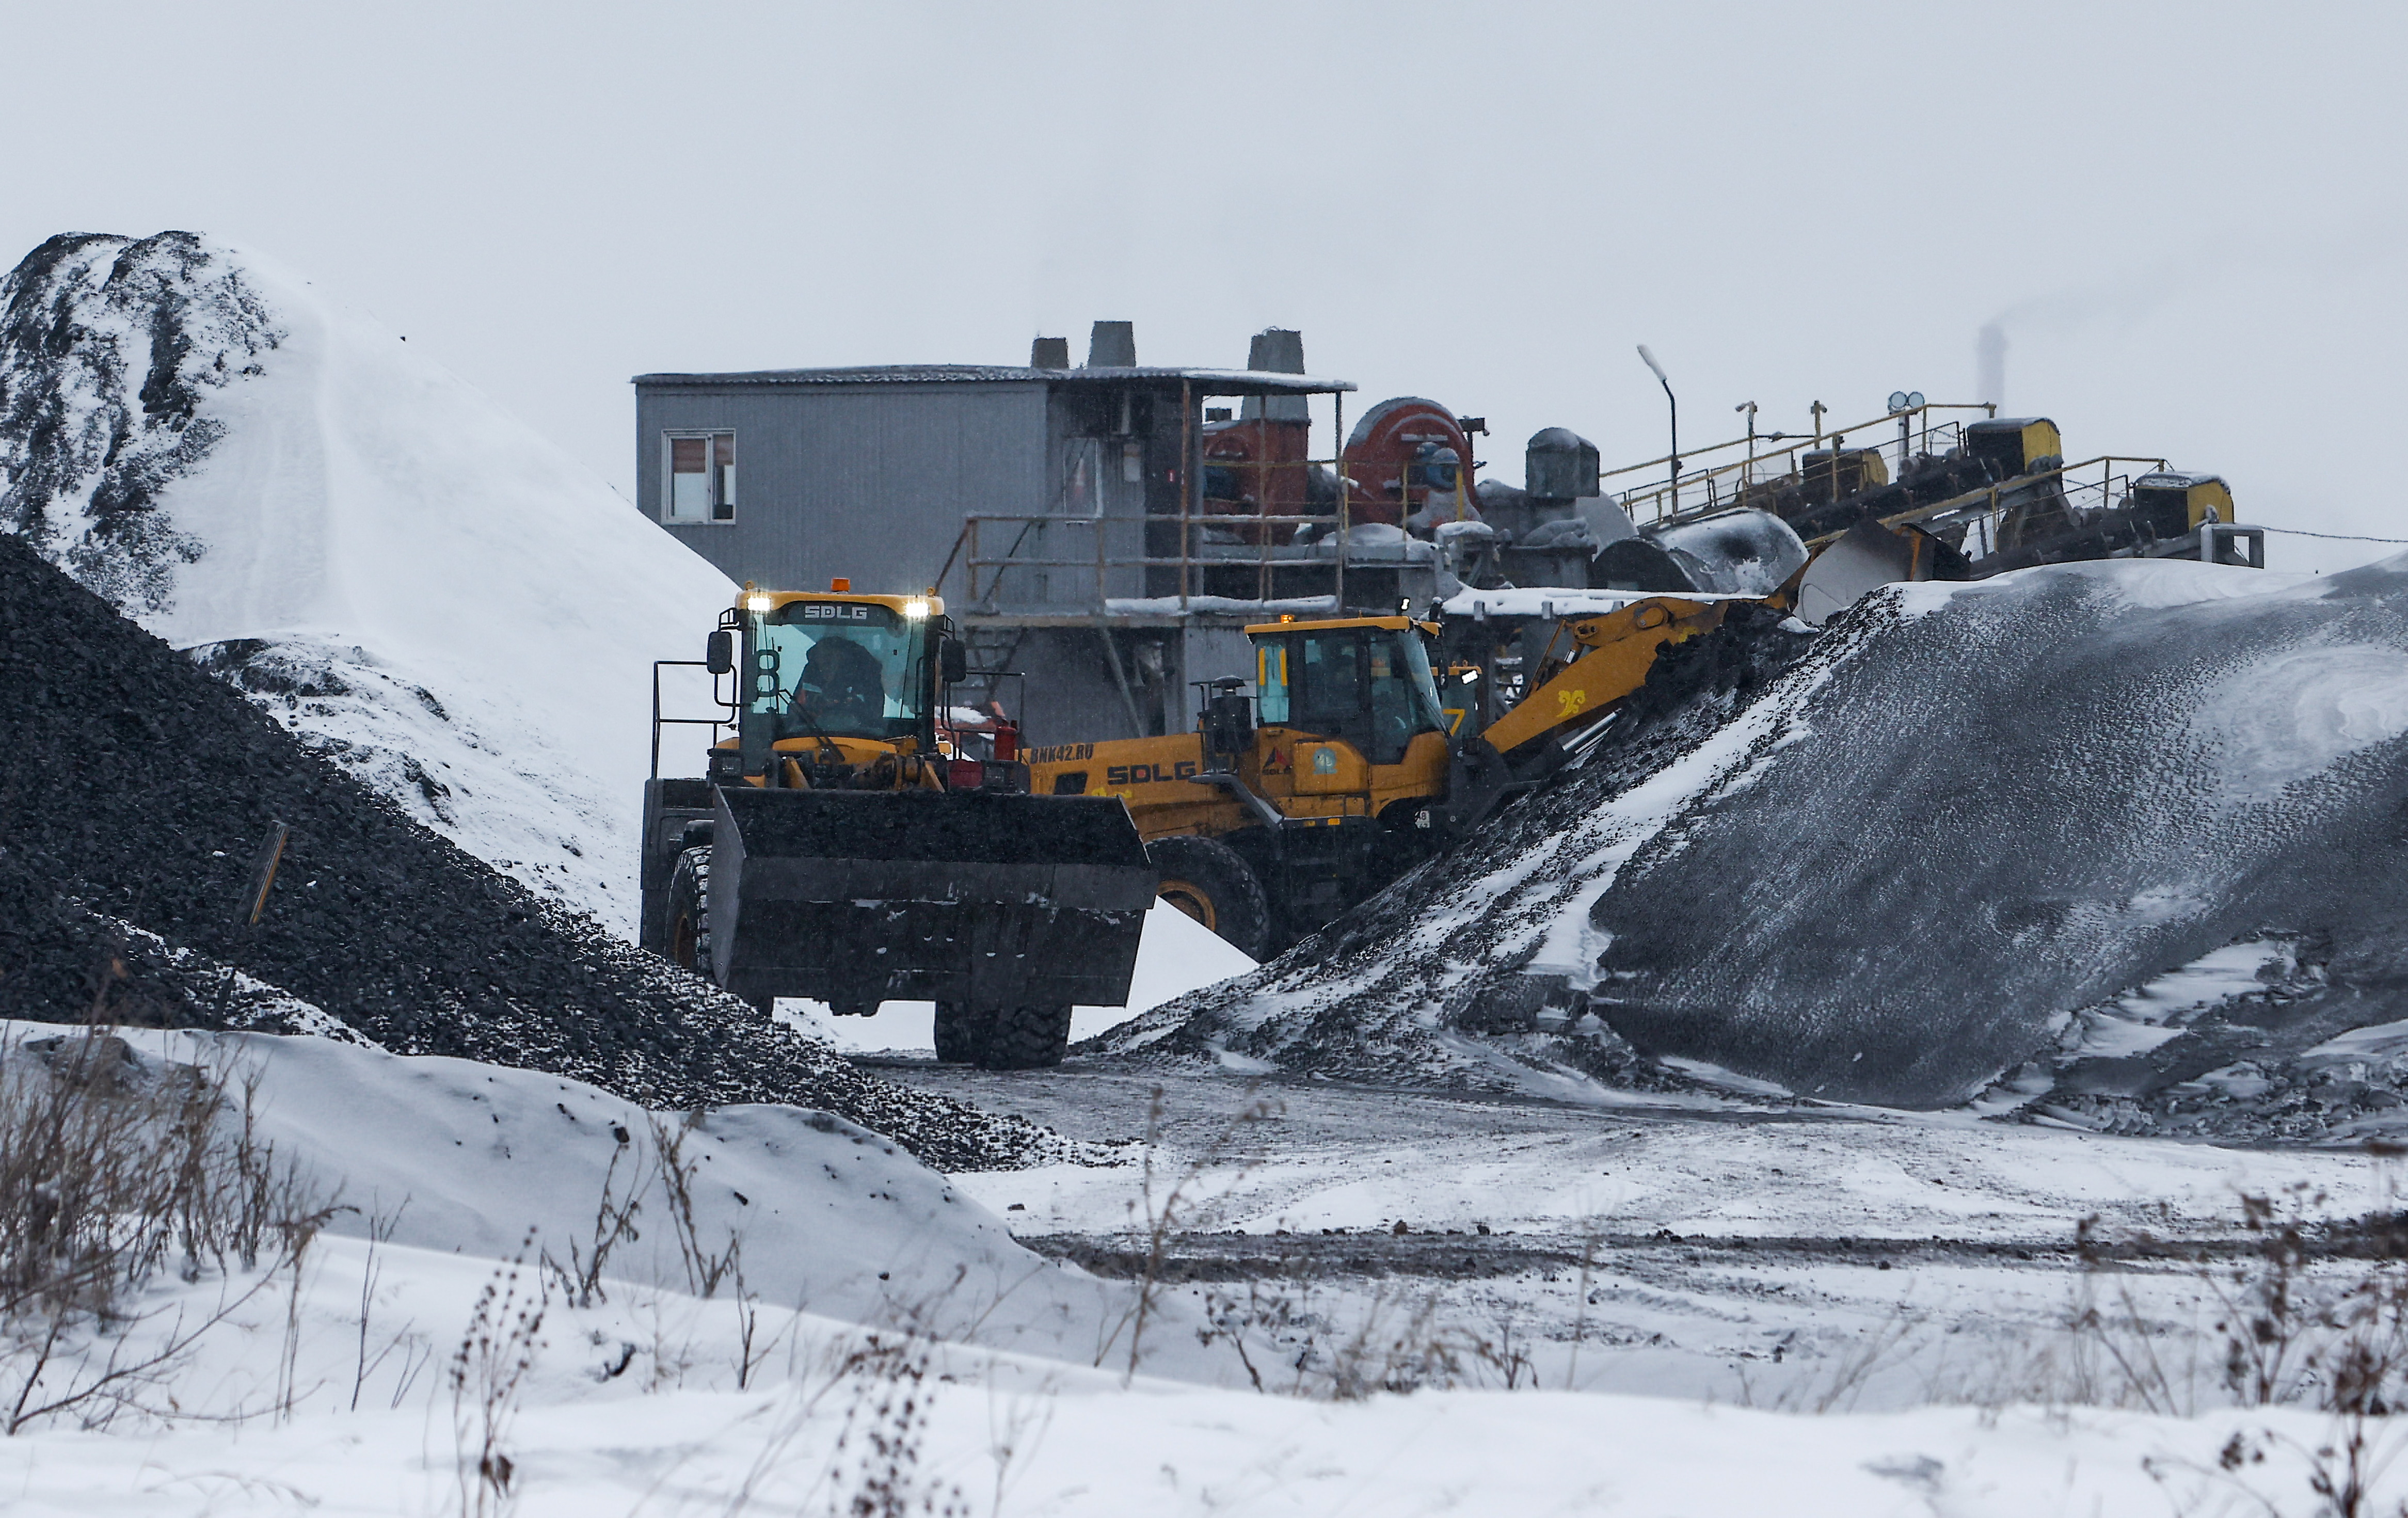 A view shows operations at Razrez Inskoy coal enterprise in the Kemerovo region